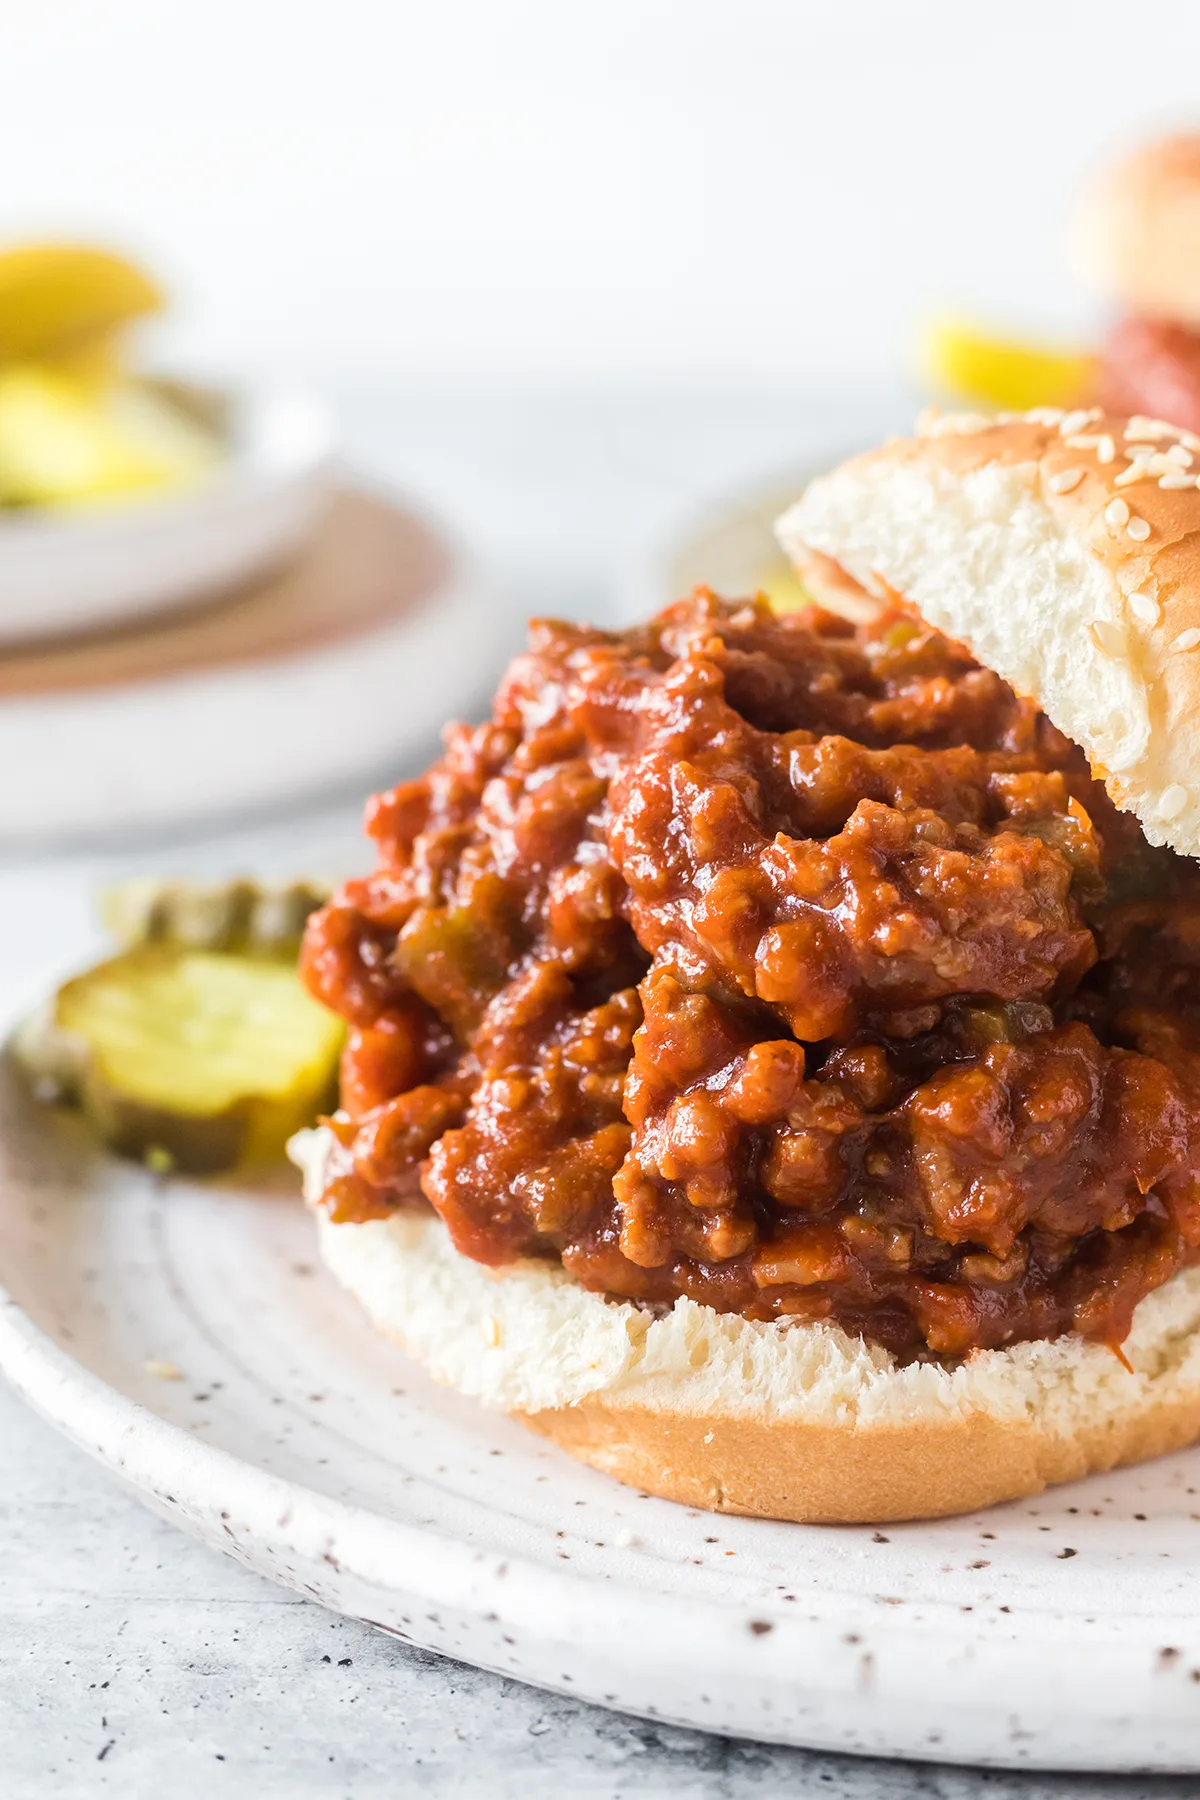 open faced sloppy joe sandwich on a small white plate served with pickle slices